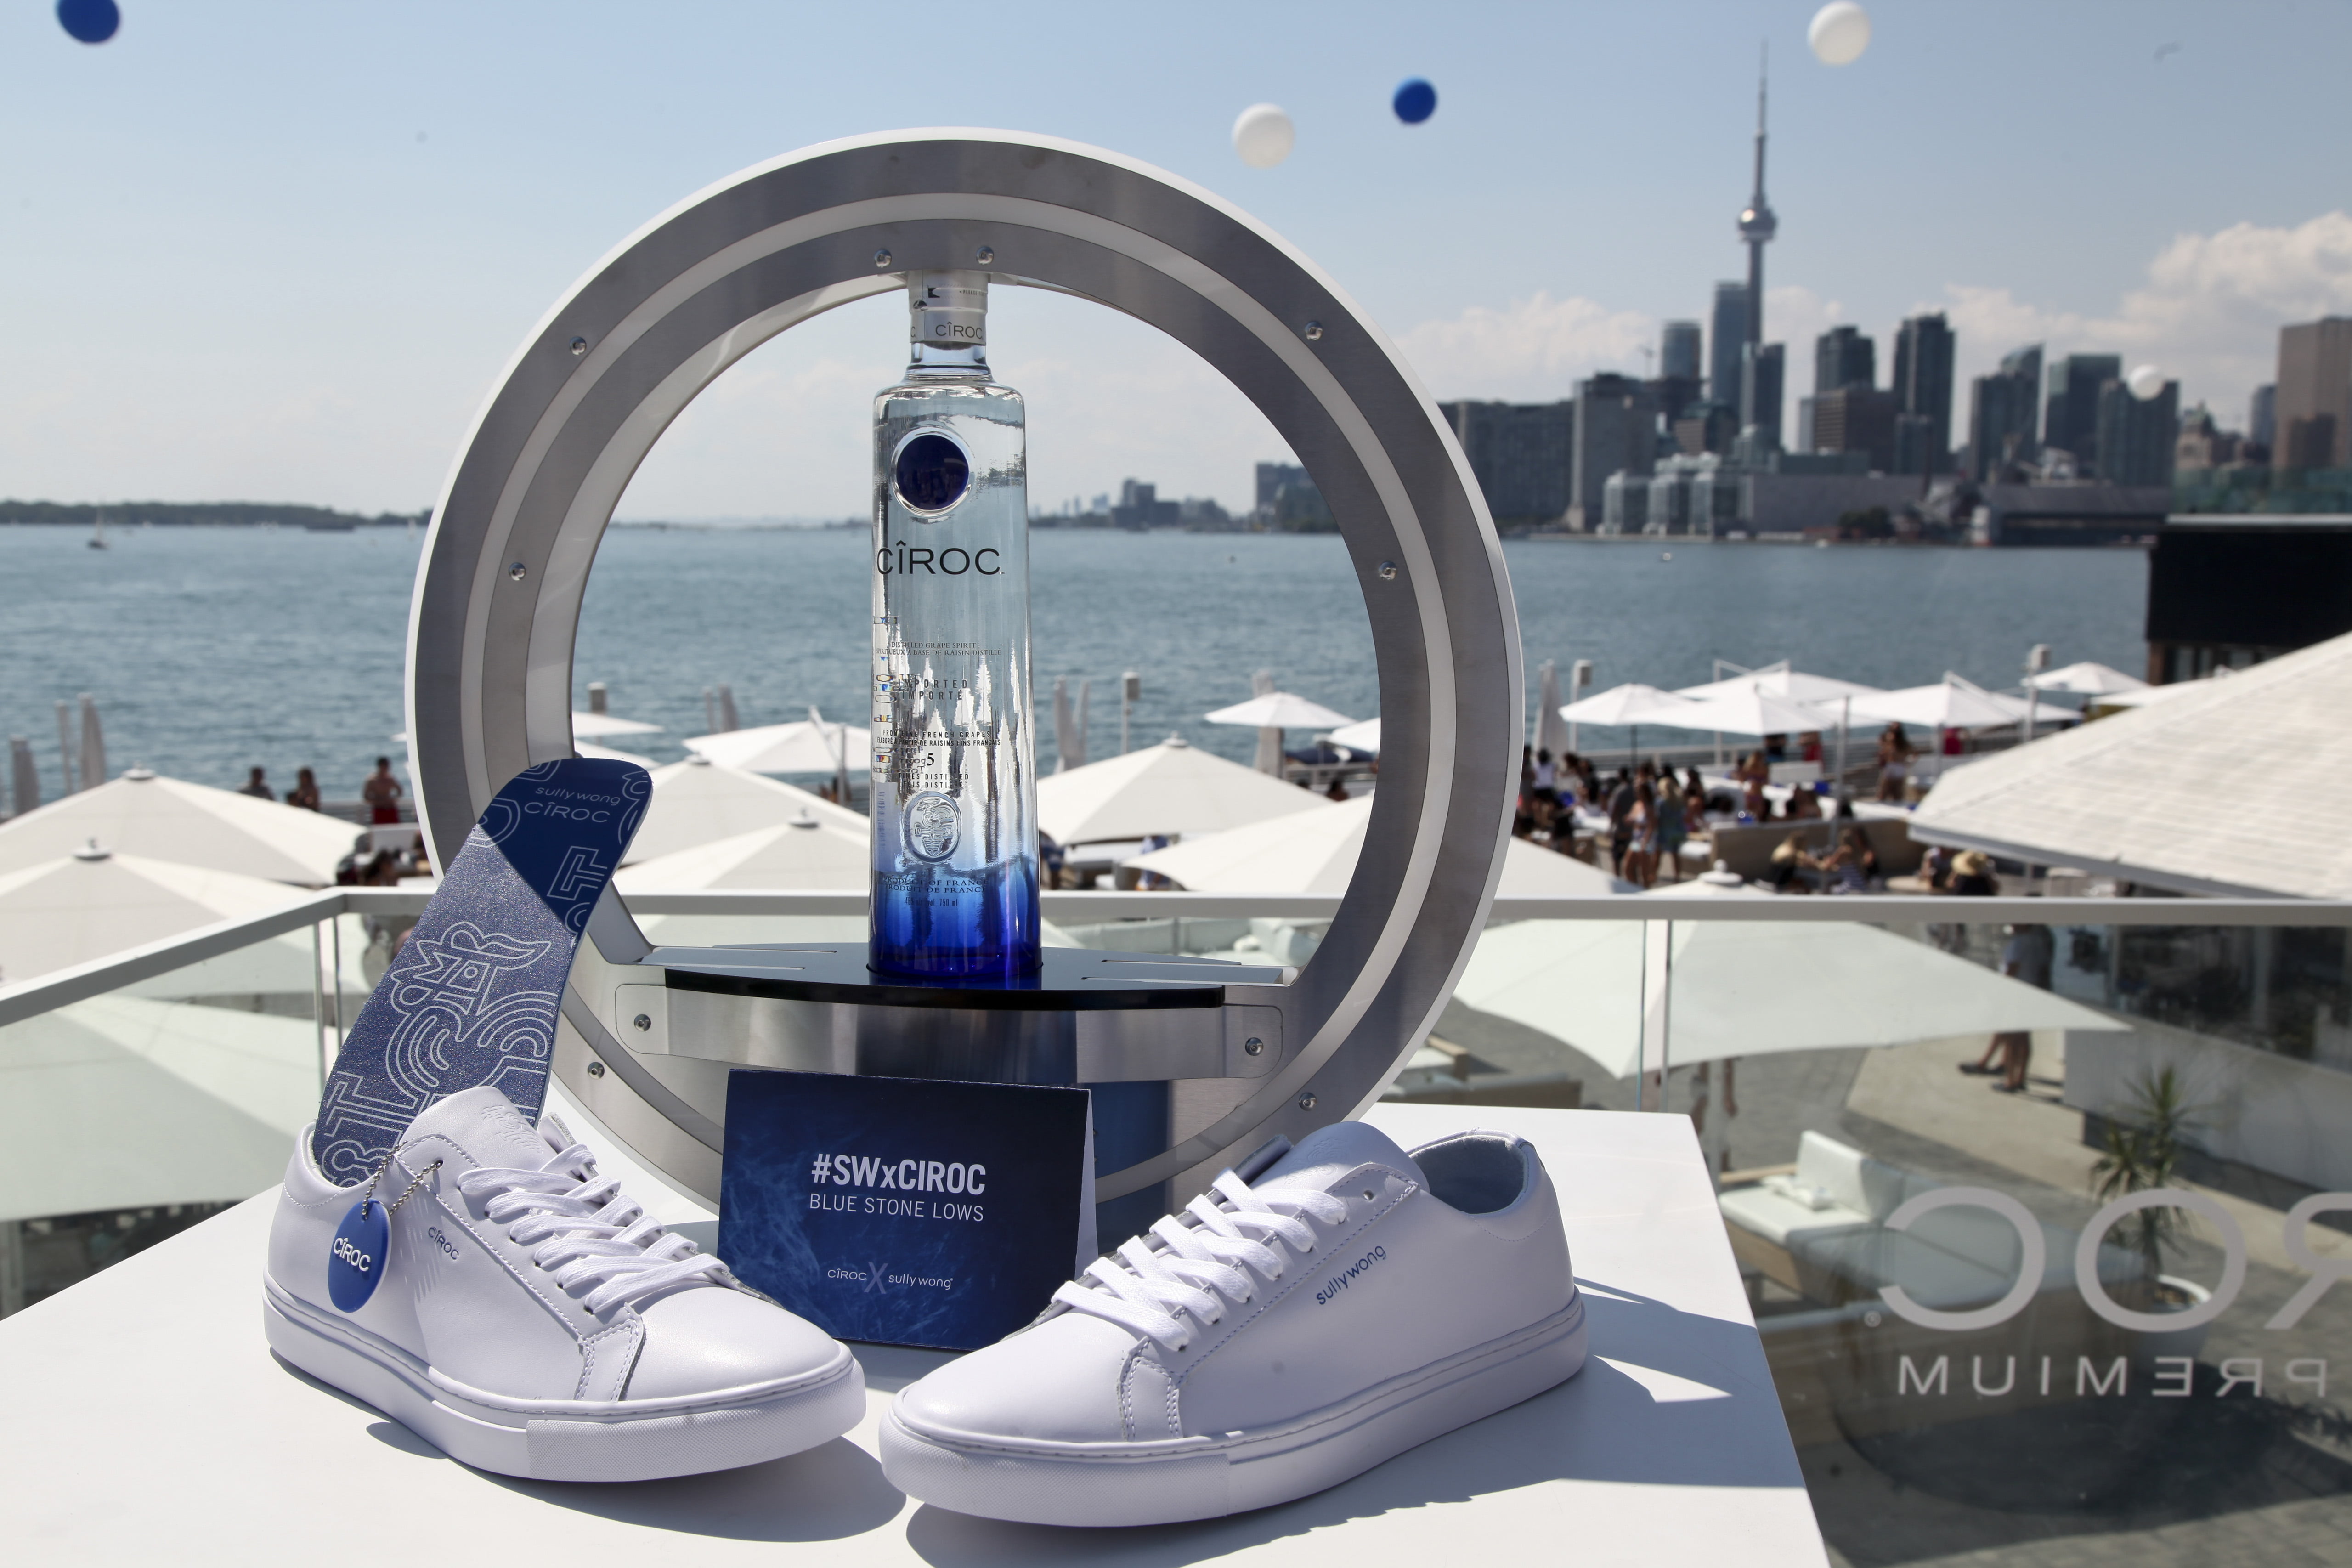 Cîroc with Sully Wong sneakers